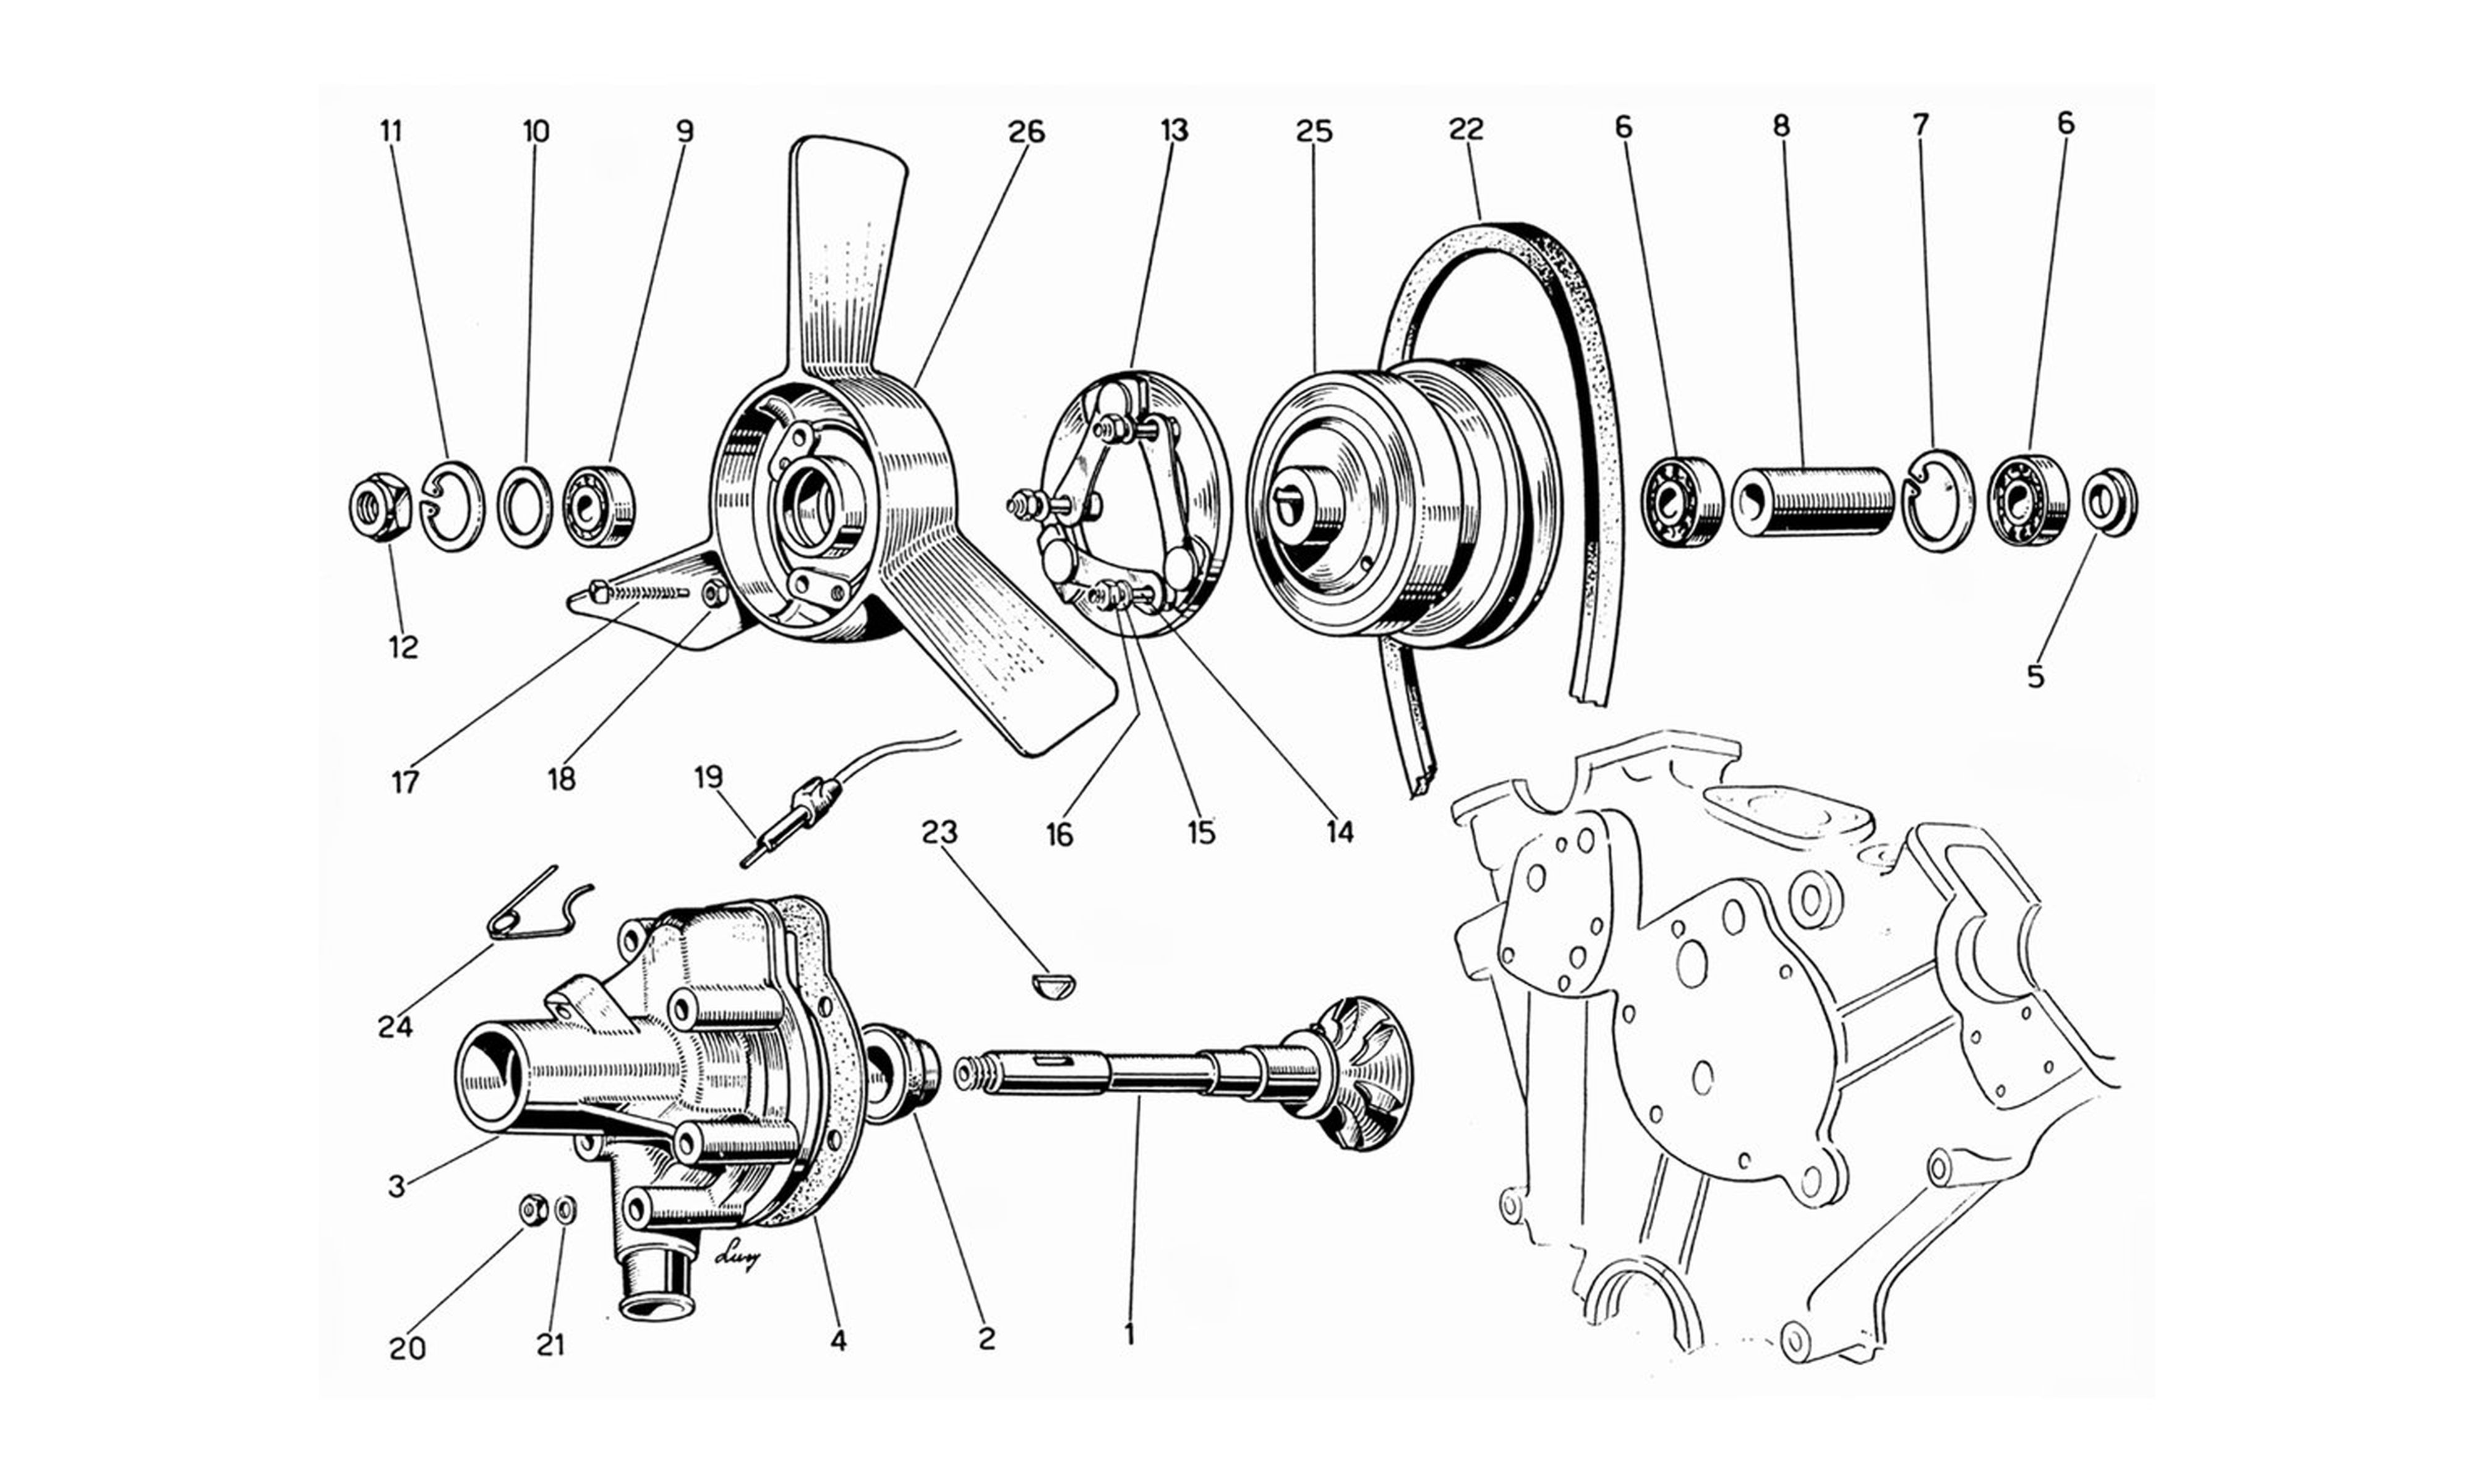 Schematic: Water Pump and Fan